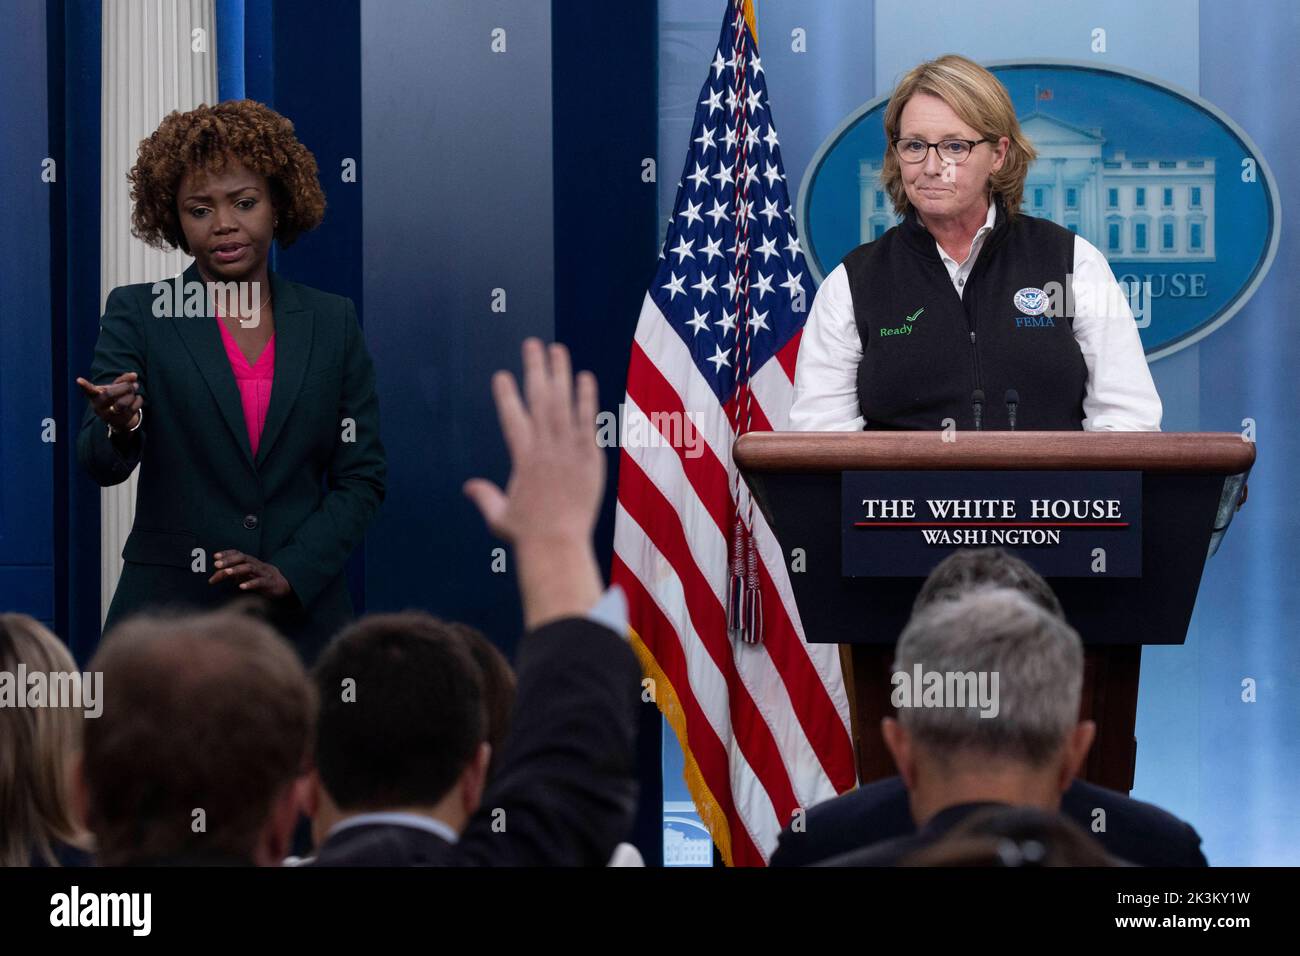 White House Press Secretary Karine Jean-Pierre (L) and Federal Emergency Management Agency (FEMA) Administrator Deanne Criswell (R) participate in a news conference in the James Brady Press Briefing Room of the White House in Washington, DC, USA, 27 September 2022. FEMA Administrator Deanne Criswell discussed preparations for Hurricane Ian, which is currently a category 3 storm. Stock Photo